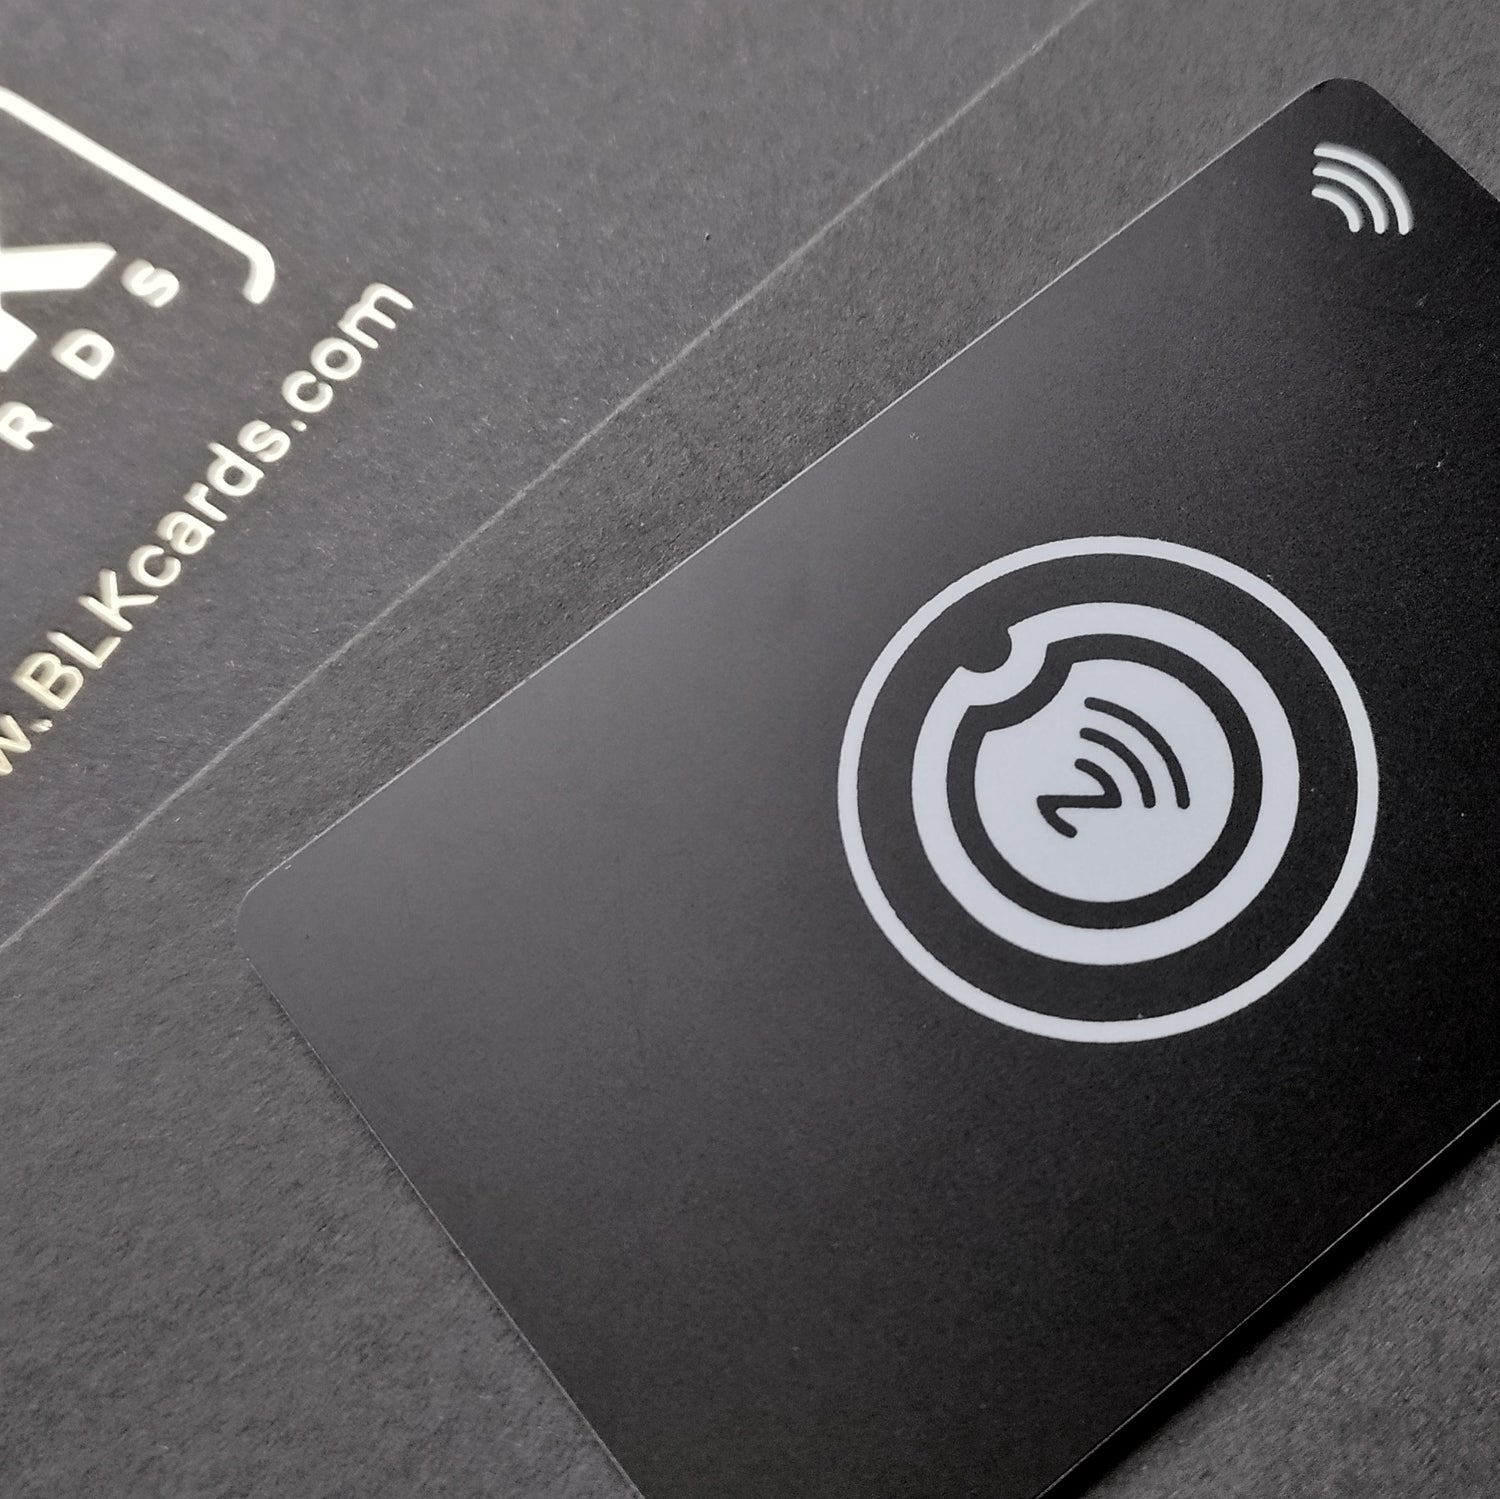 NFC Business Cards, NFC Cards Manufacturer & Company